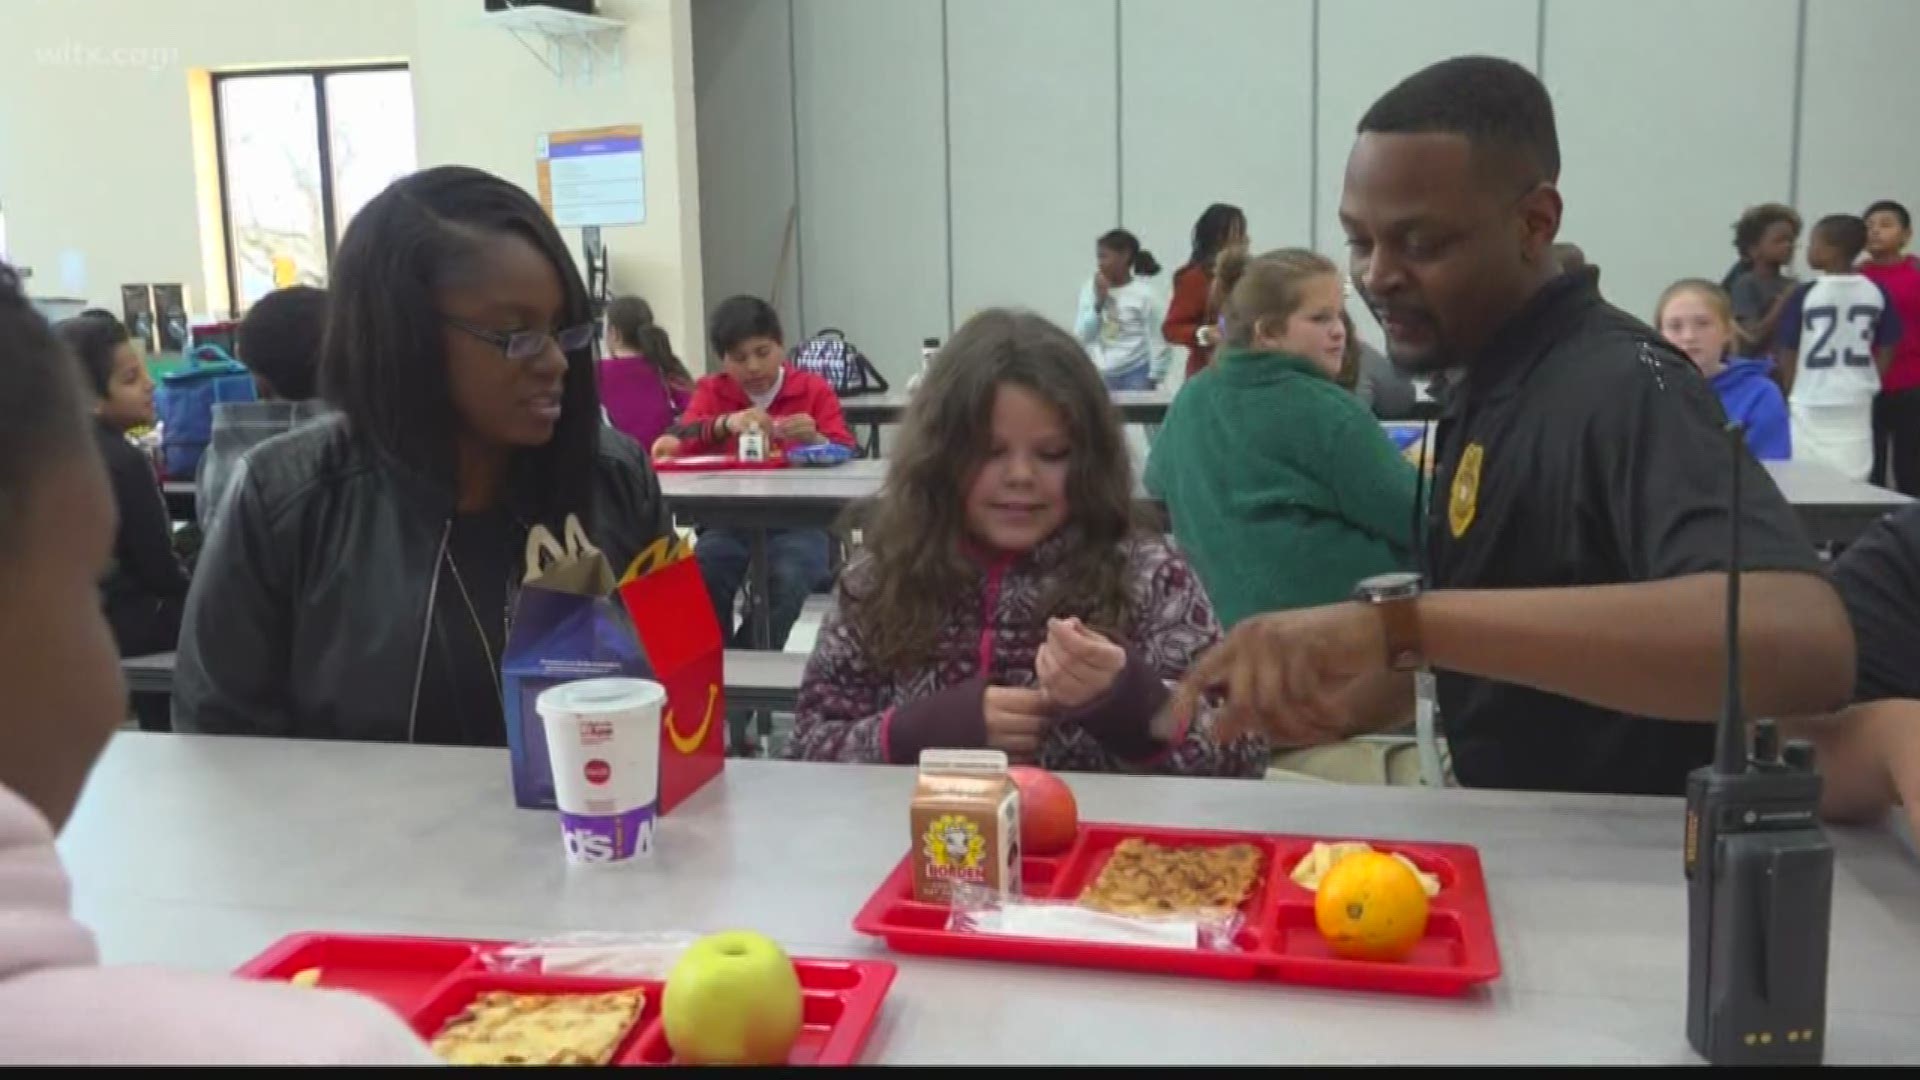 Congaree Elementary has launched a new program to recognize students who do their best in school.